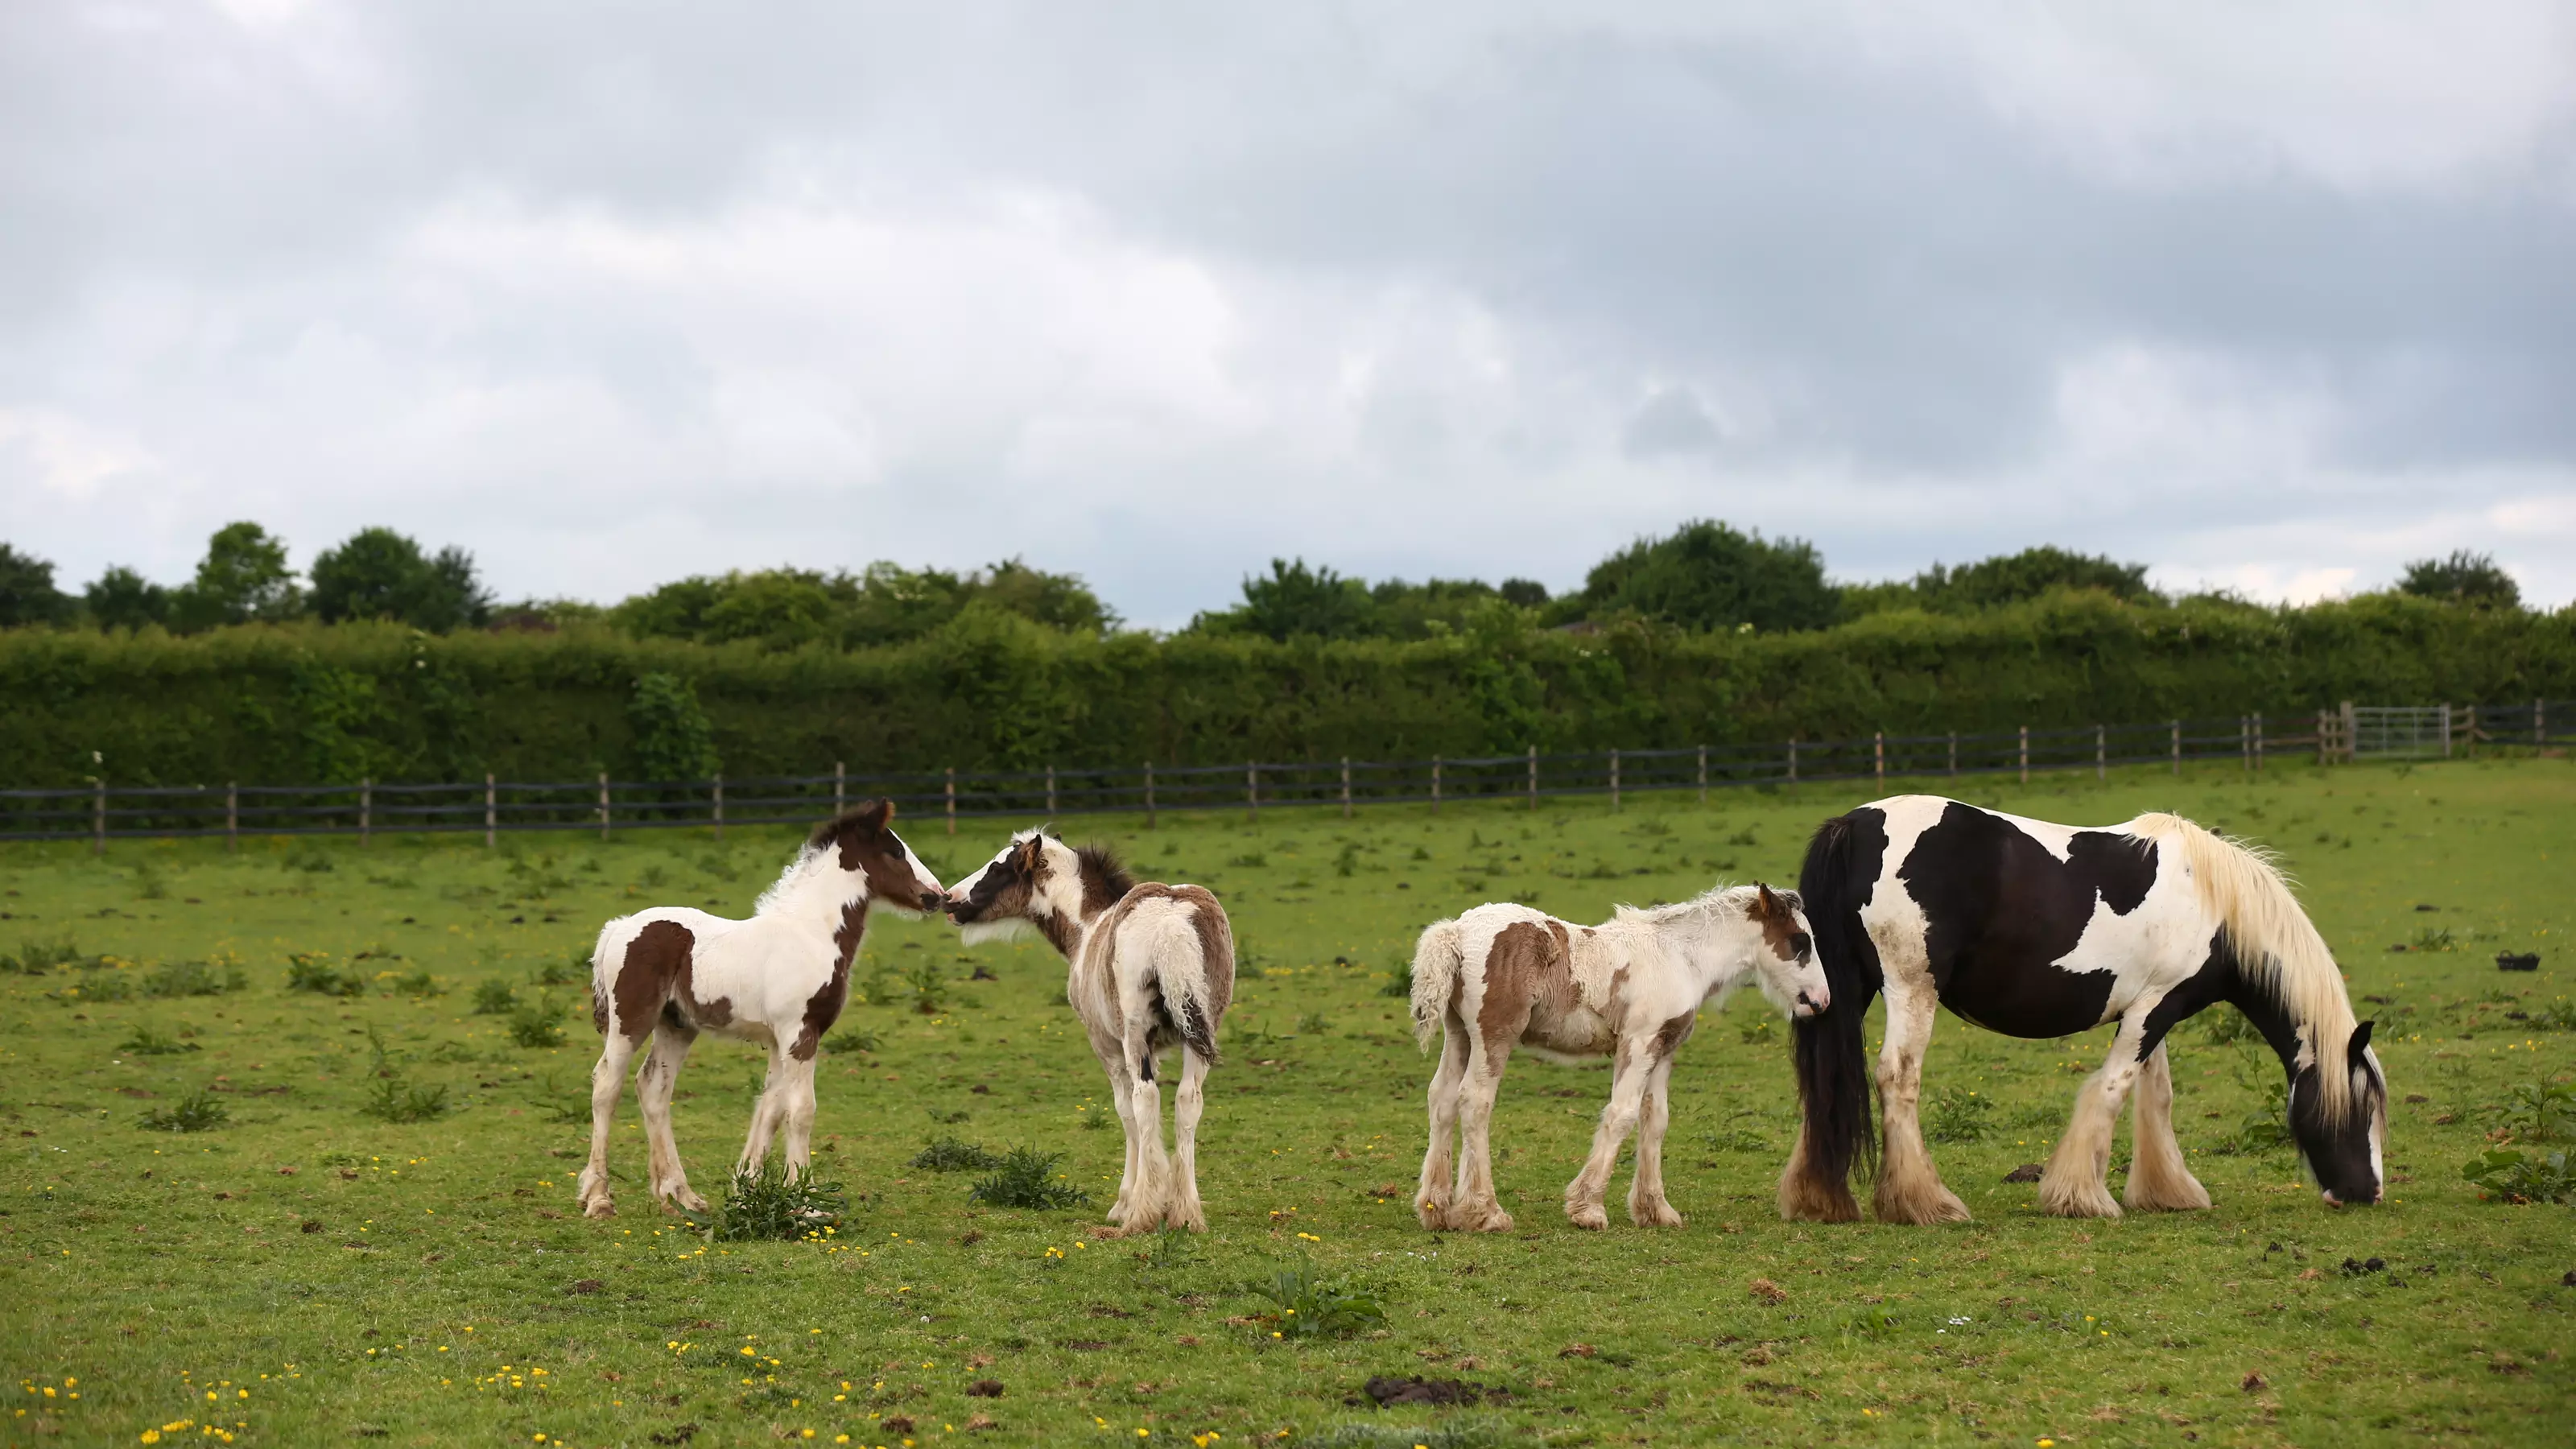 A pony grazes in the field with three foals.